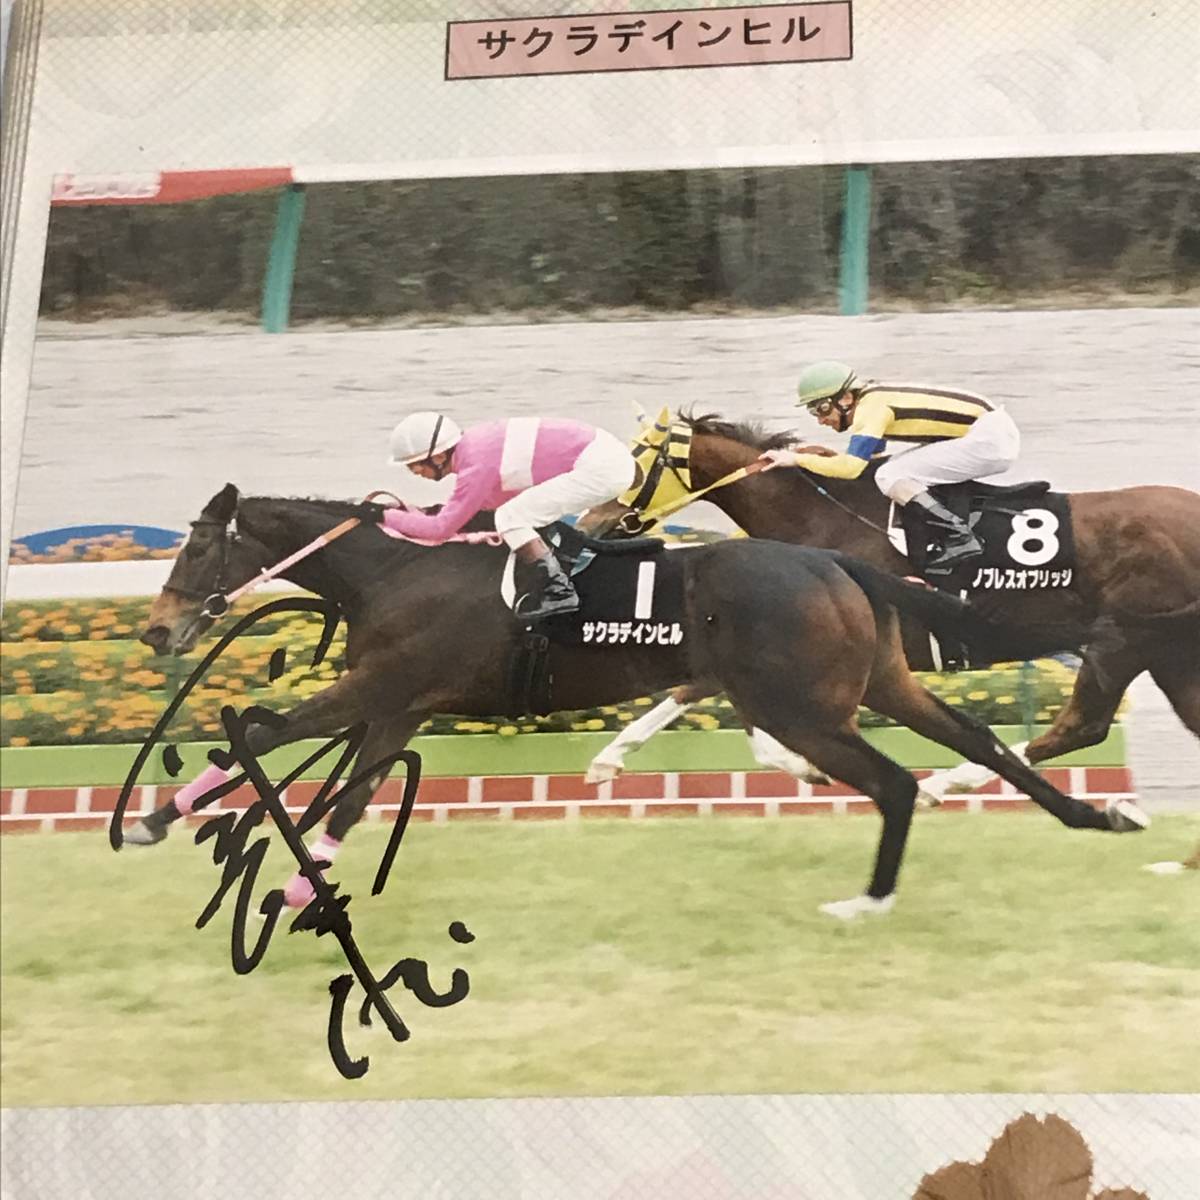  Okabe . male . hand with autograph Sakura din Hill goal front photograph thousand . special (2002.11.17)